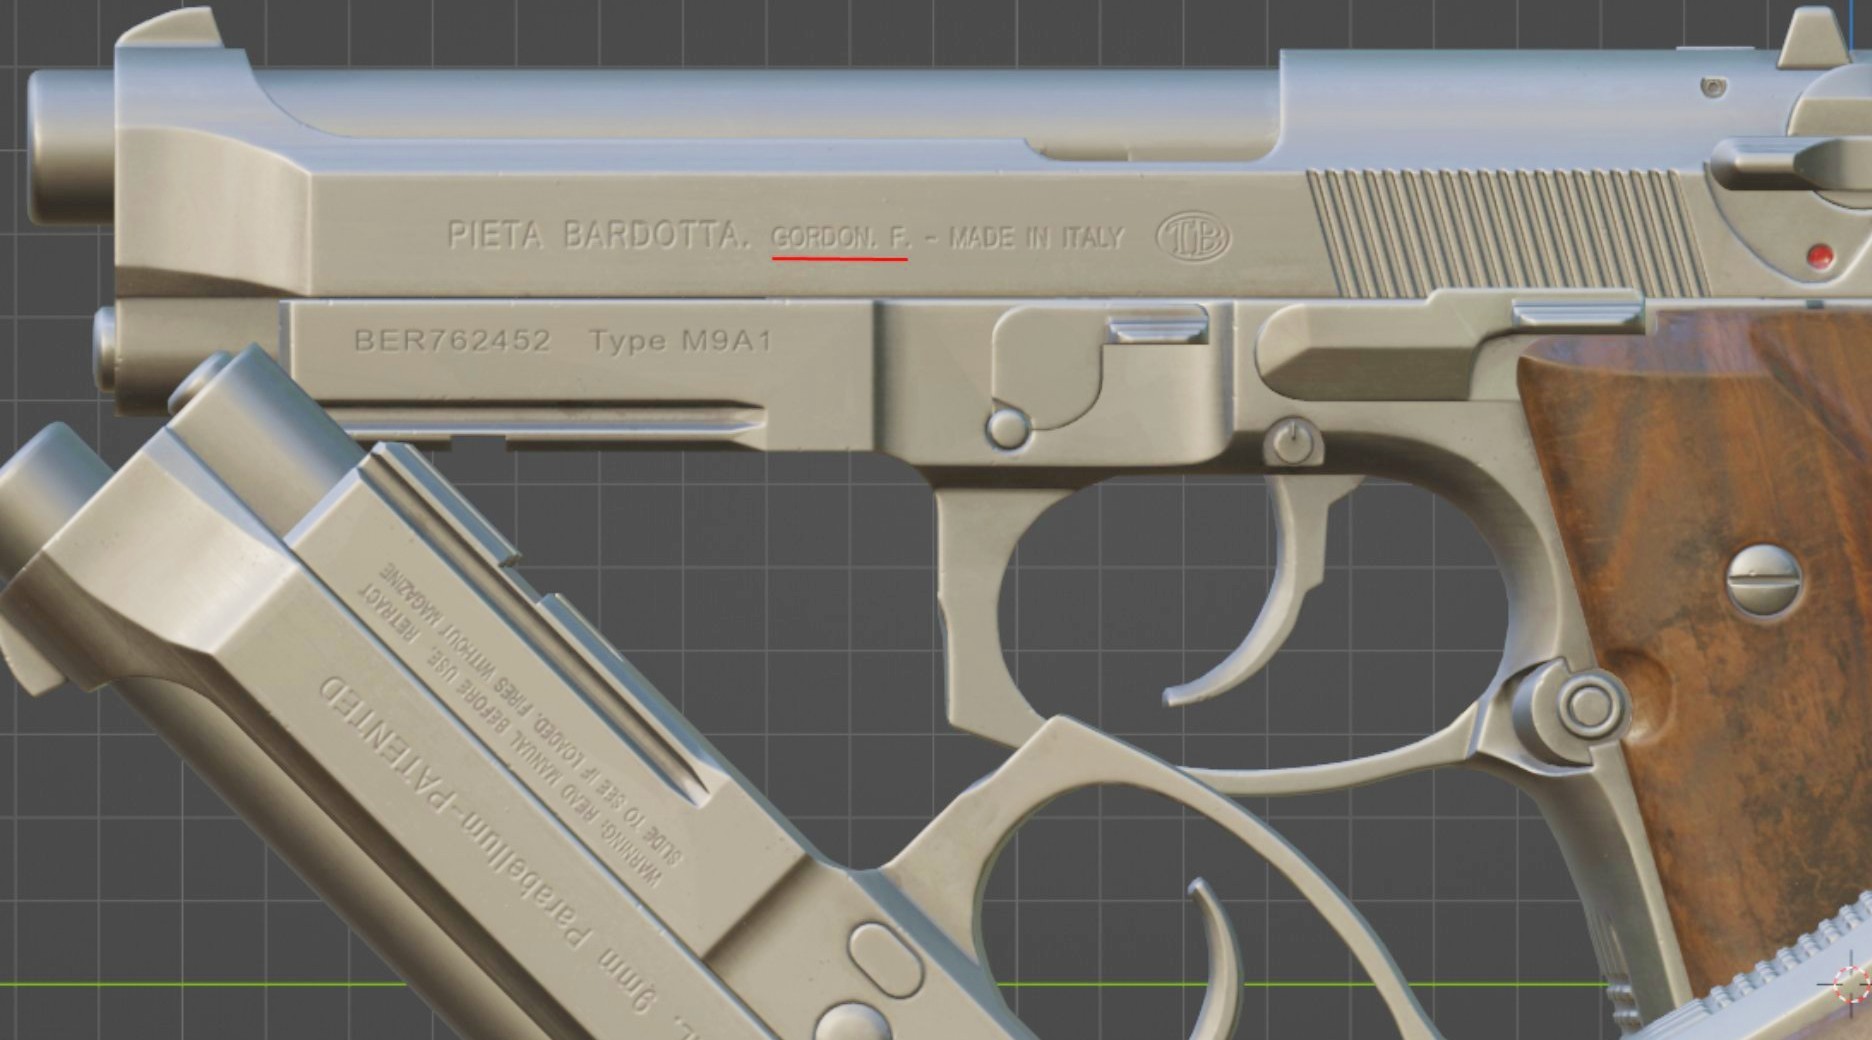 Counter-Strike 2 is hiding a very secret Half-Life reference: A close-up image of a handgun from Valve FPS game Counter-Strike 2 highlighting the name Gordon Freeman